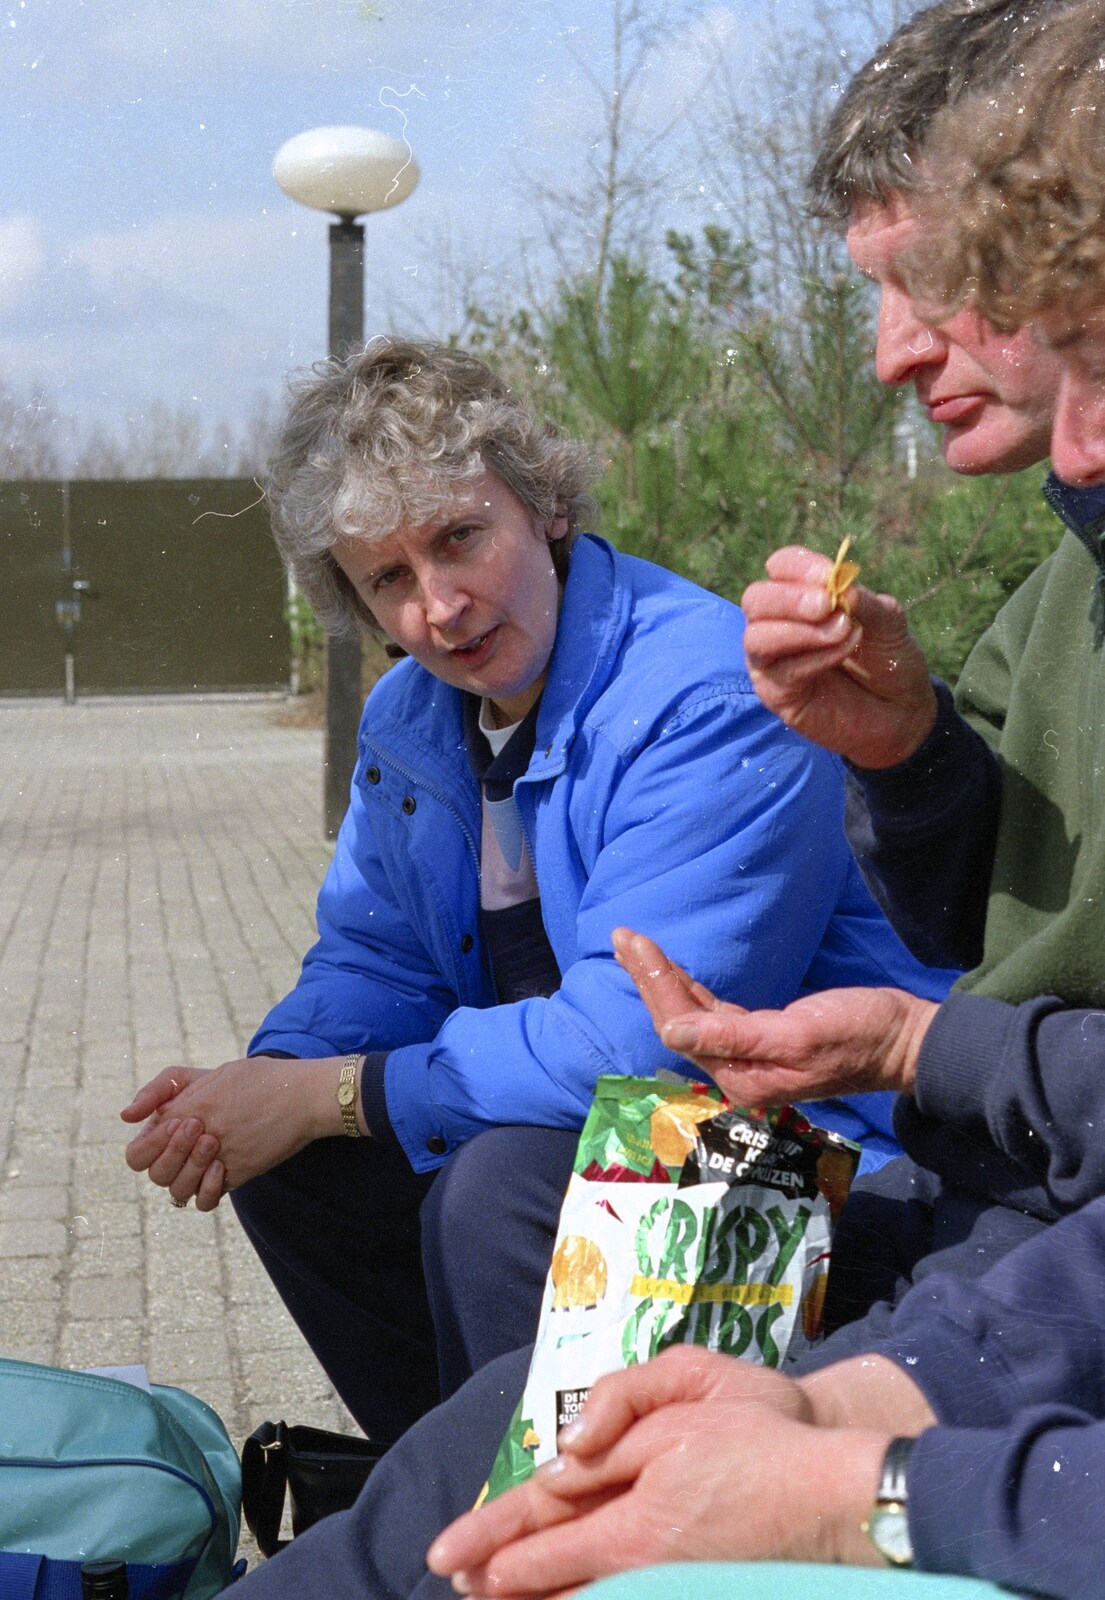 A Trip to Center Parcs, Eemhof, Netherlands - 24th March 1992: Passing around a bag of 'crispy chips'